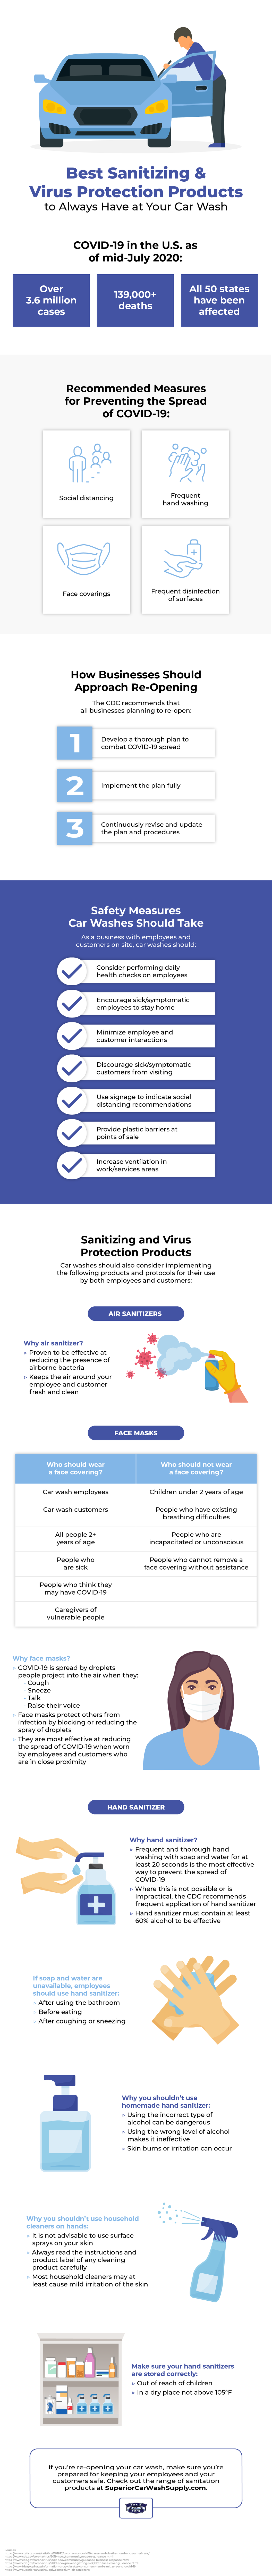 Best Sanitizing & Virus Protection Products to Always Have at Your Car Wash